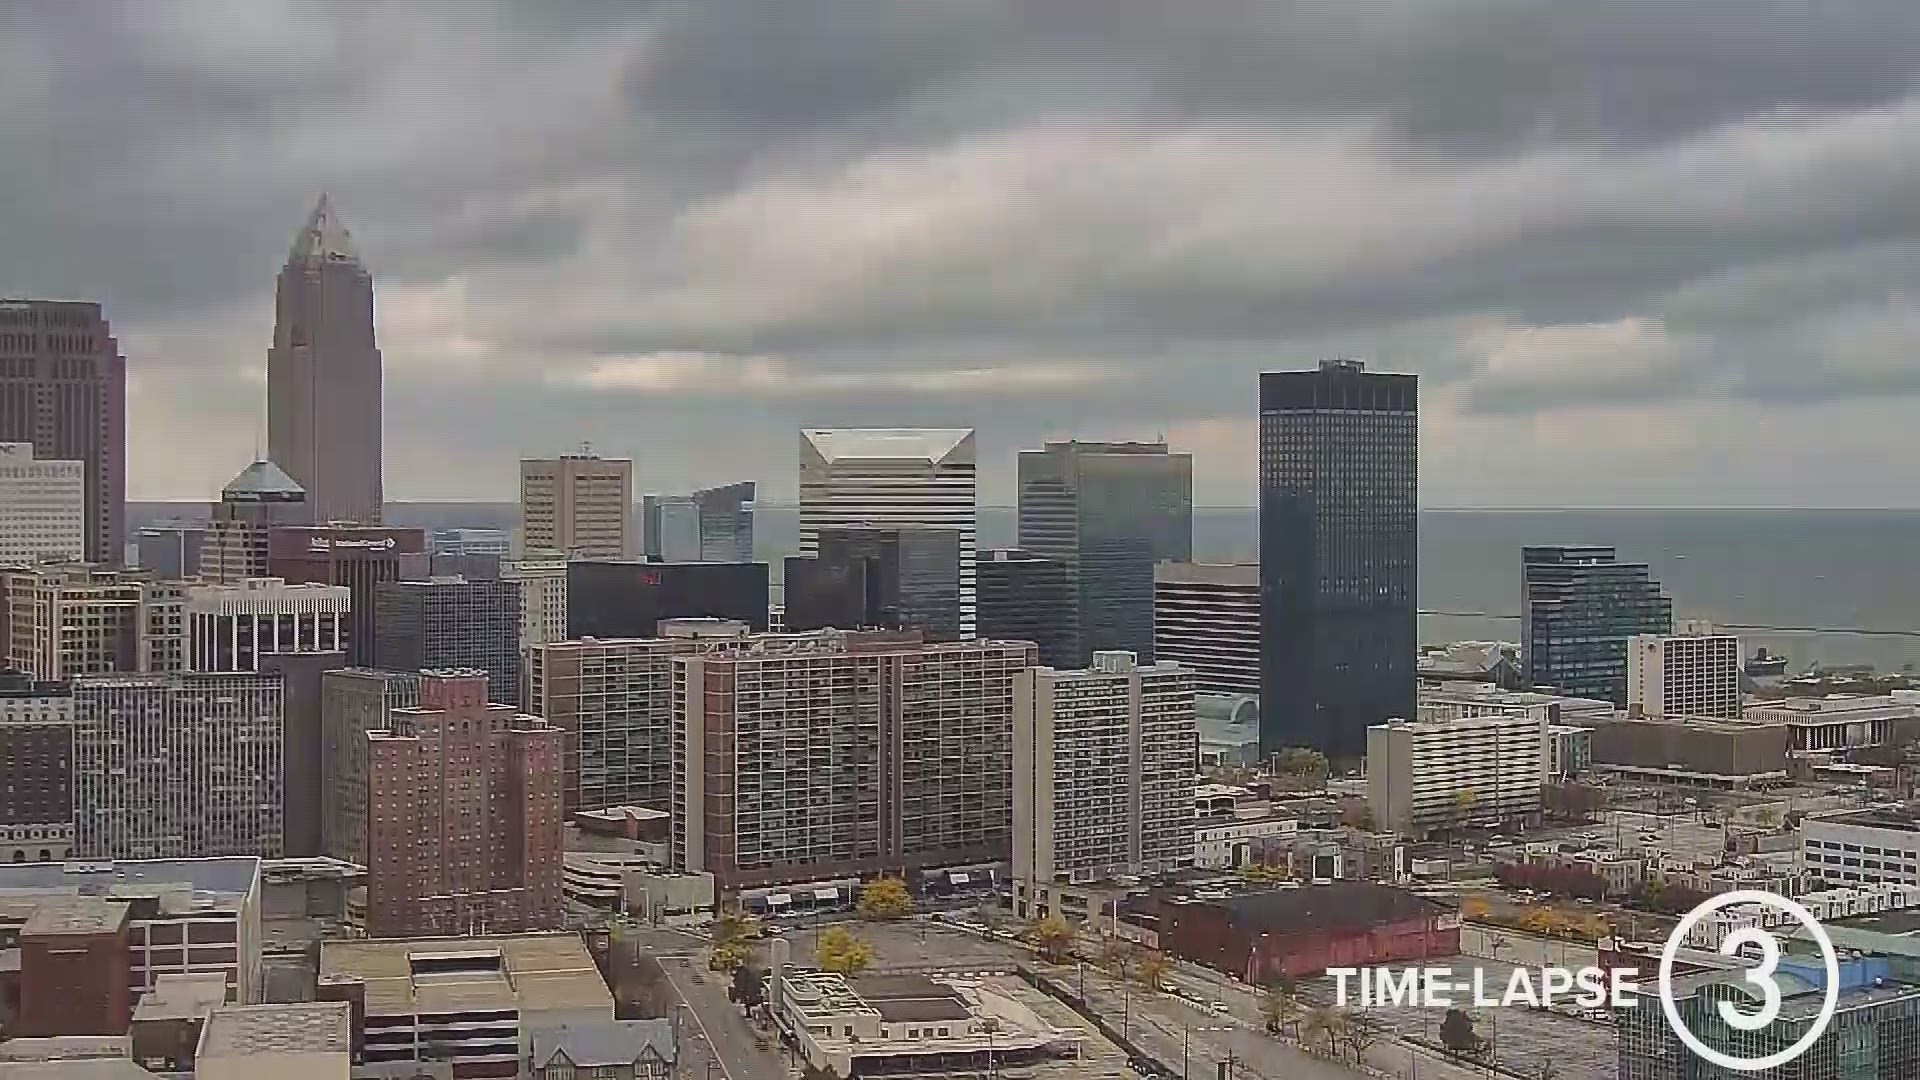 The wind was blowing around the WKYC Studios CSU Cam on Sunday as rain changed to snow by the afternoon. Check out Sunday's weather time-lapse. #3weather @wkyc #wx